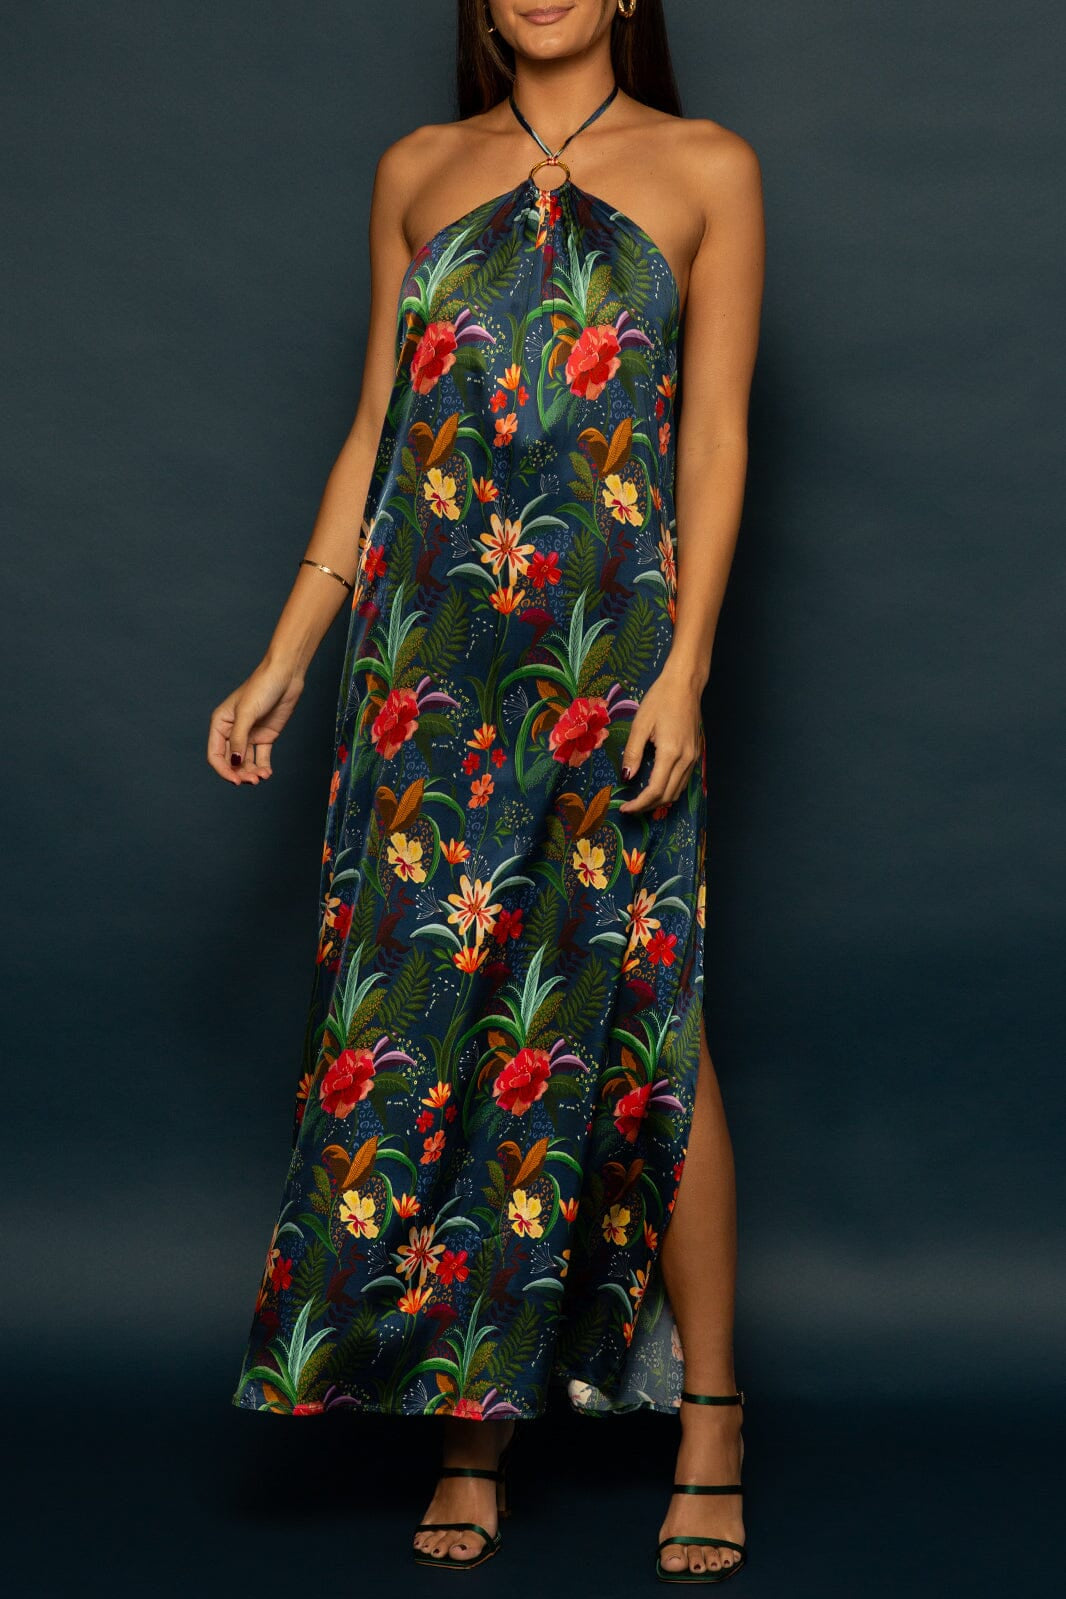 O-RING TIE MAXI - OCEANSIDE FLORALS - XS